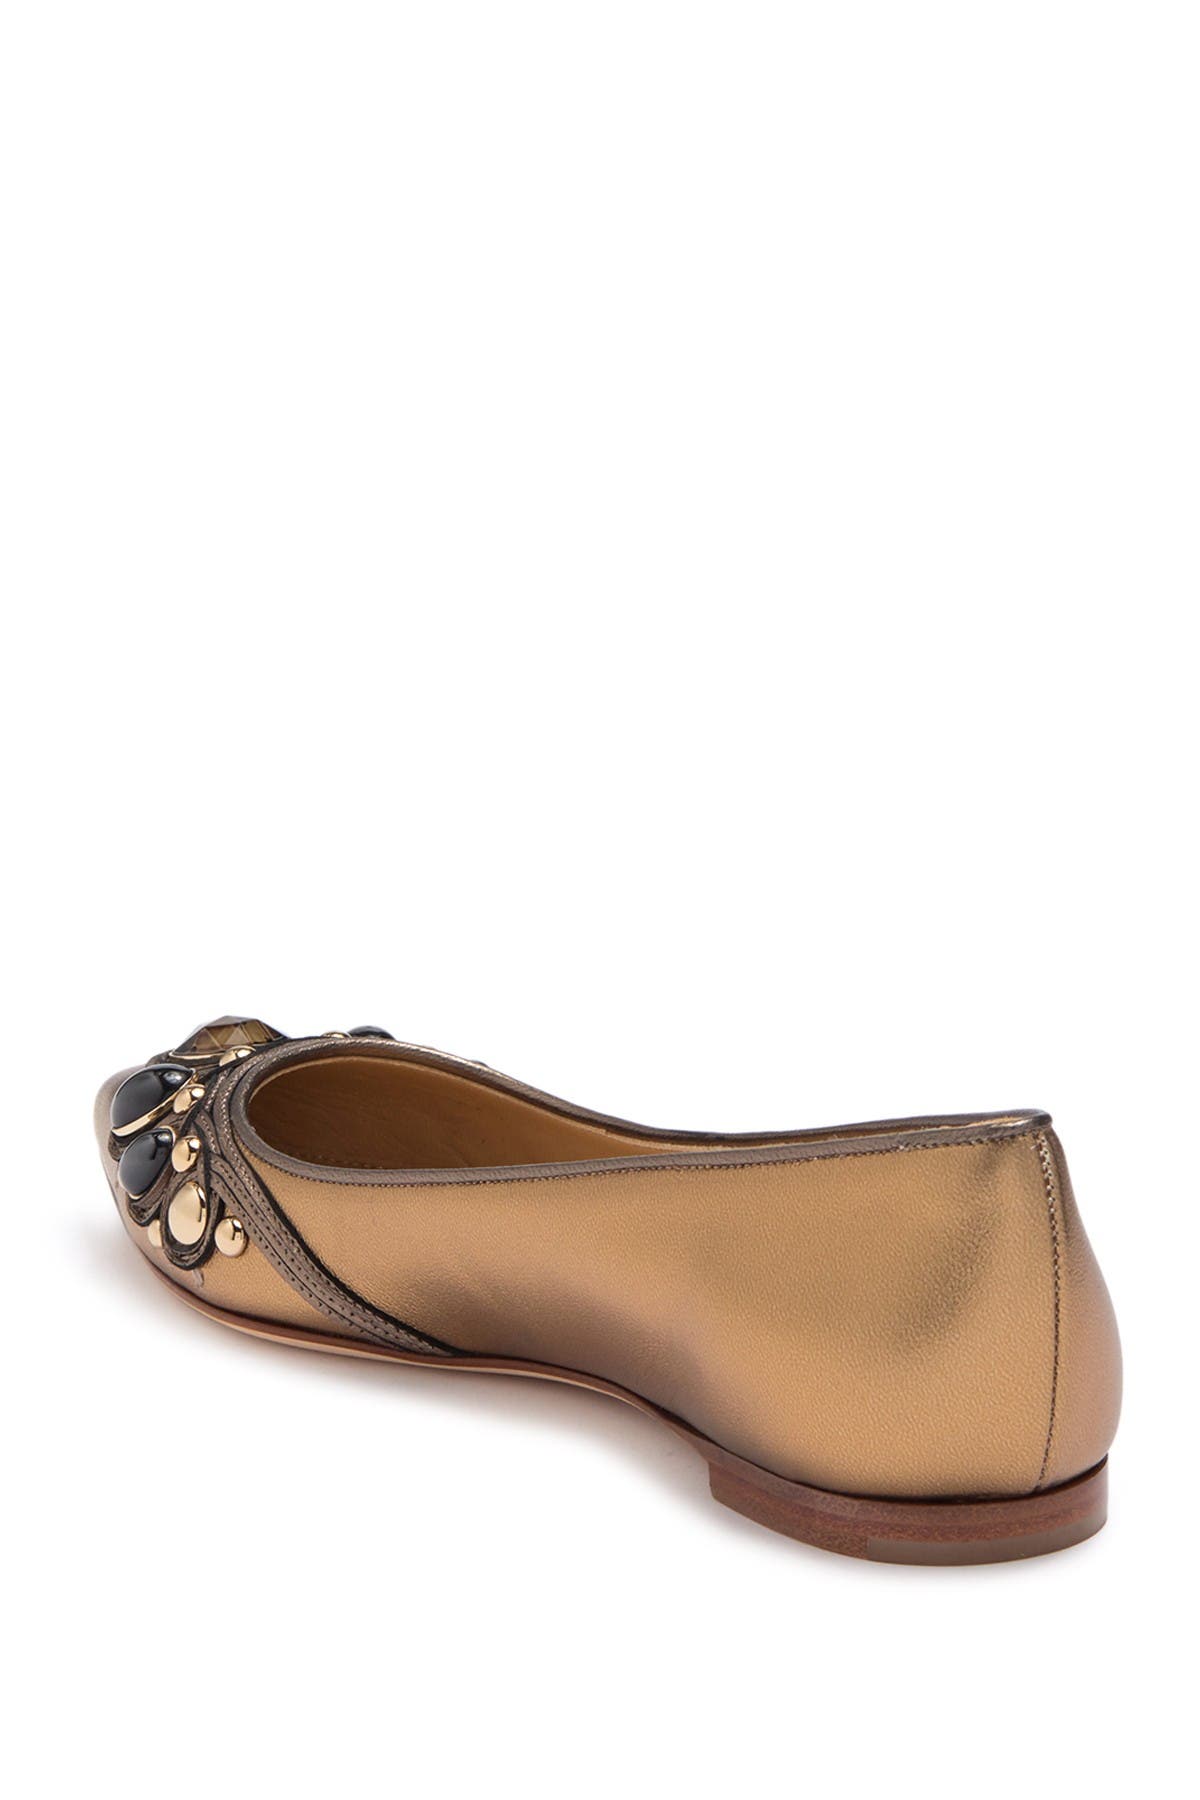 Sergio Rossi Stone Embellished Pointed Toe Flat In Gold2